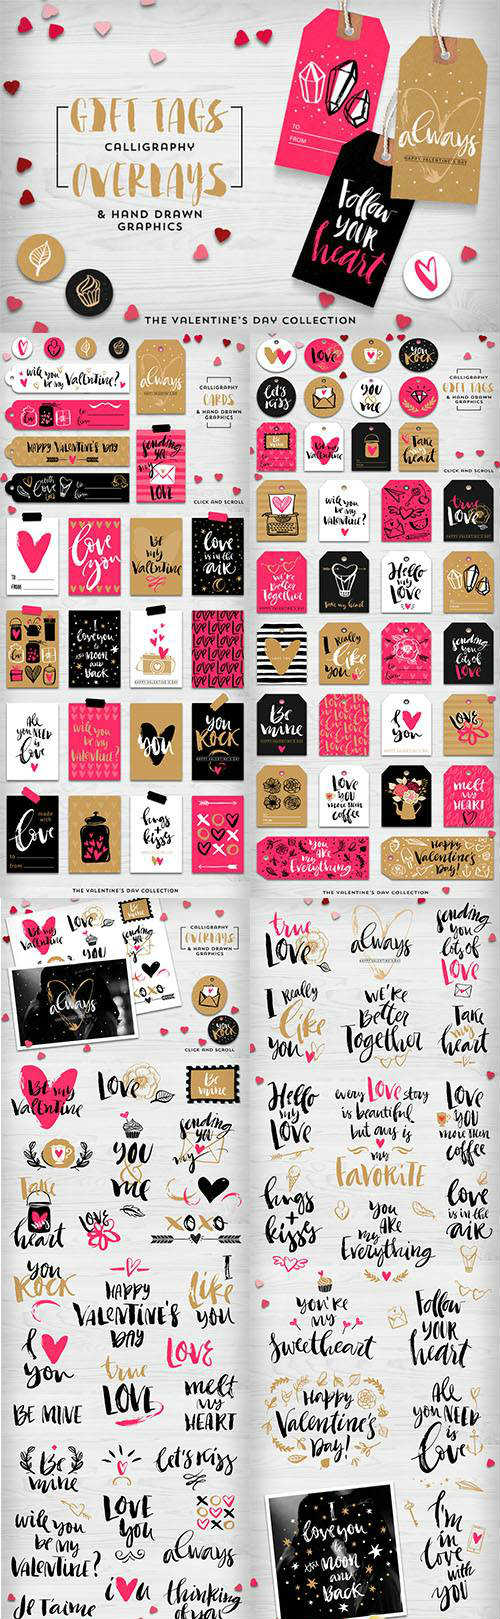 Valentine's day gift tags & overlays id 518165